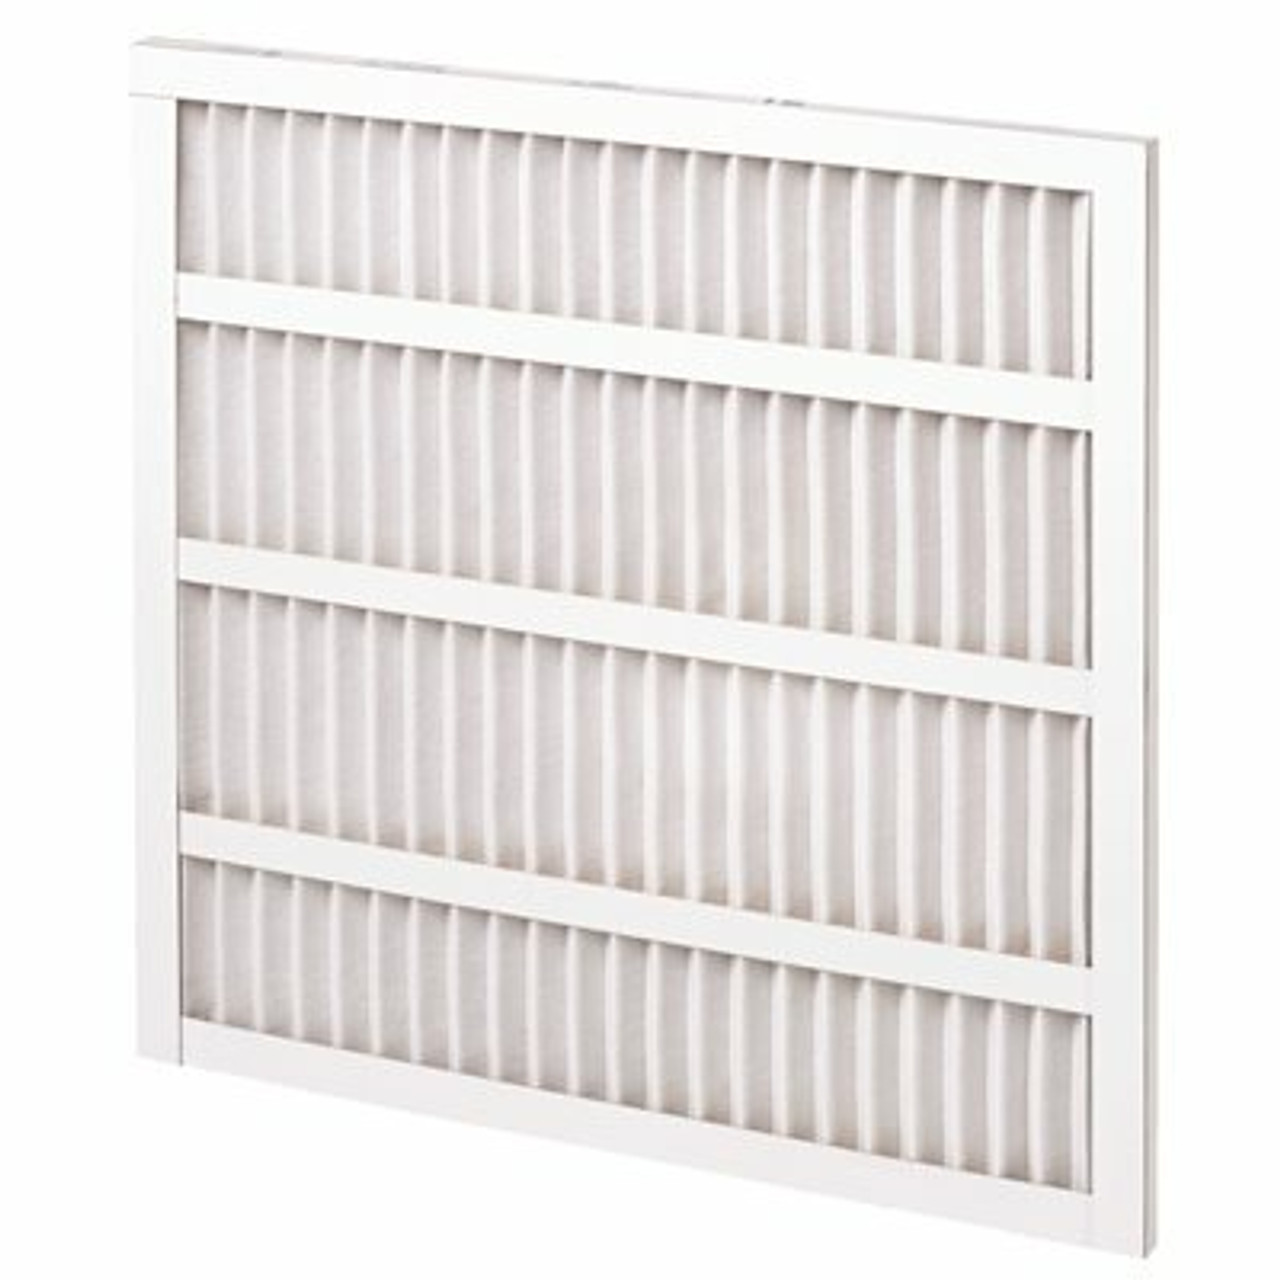 14 X 20 X 1 Standard Capacity Self-Supported Pleated Air Filter MERV 8 (12-Case)